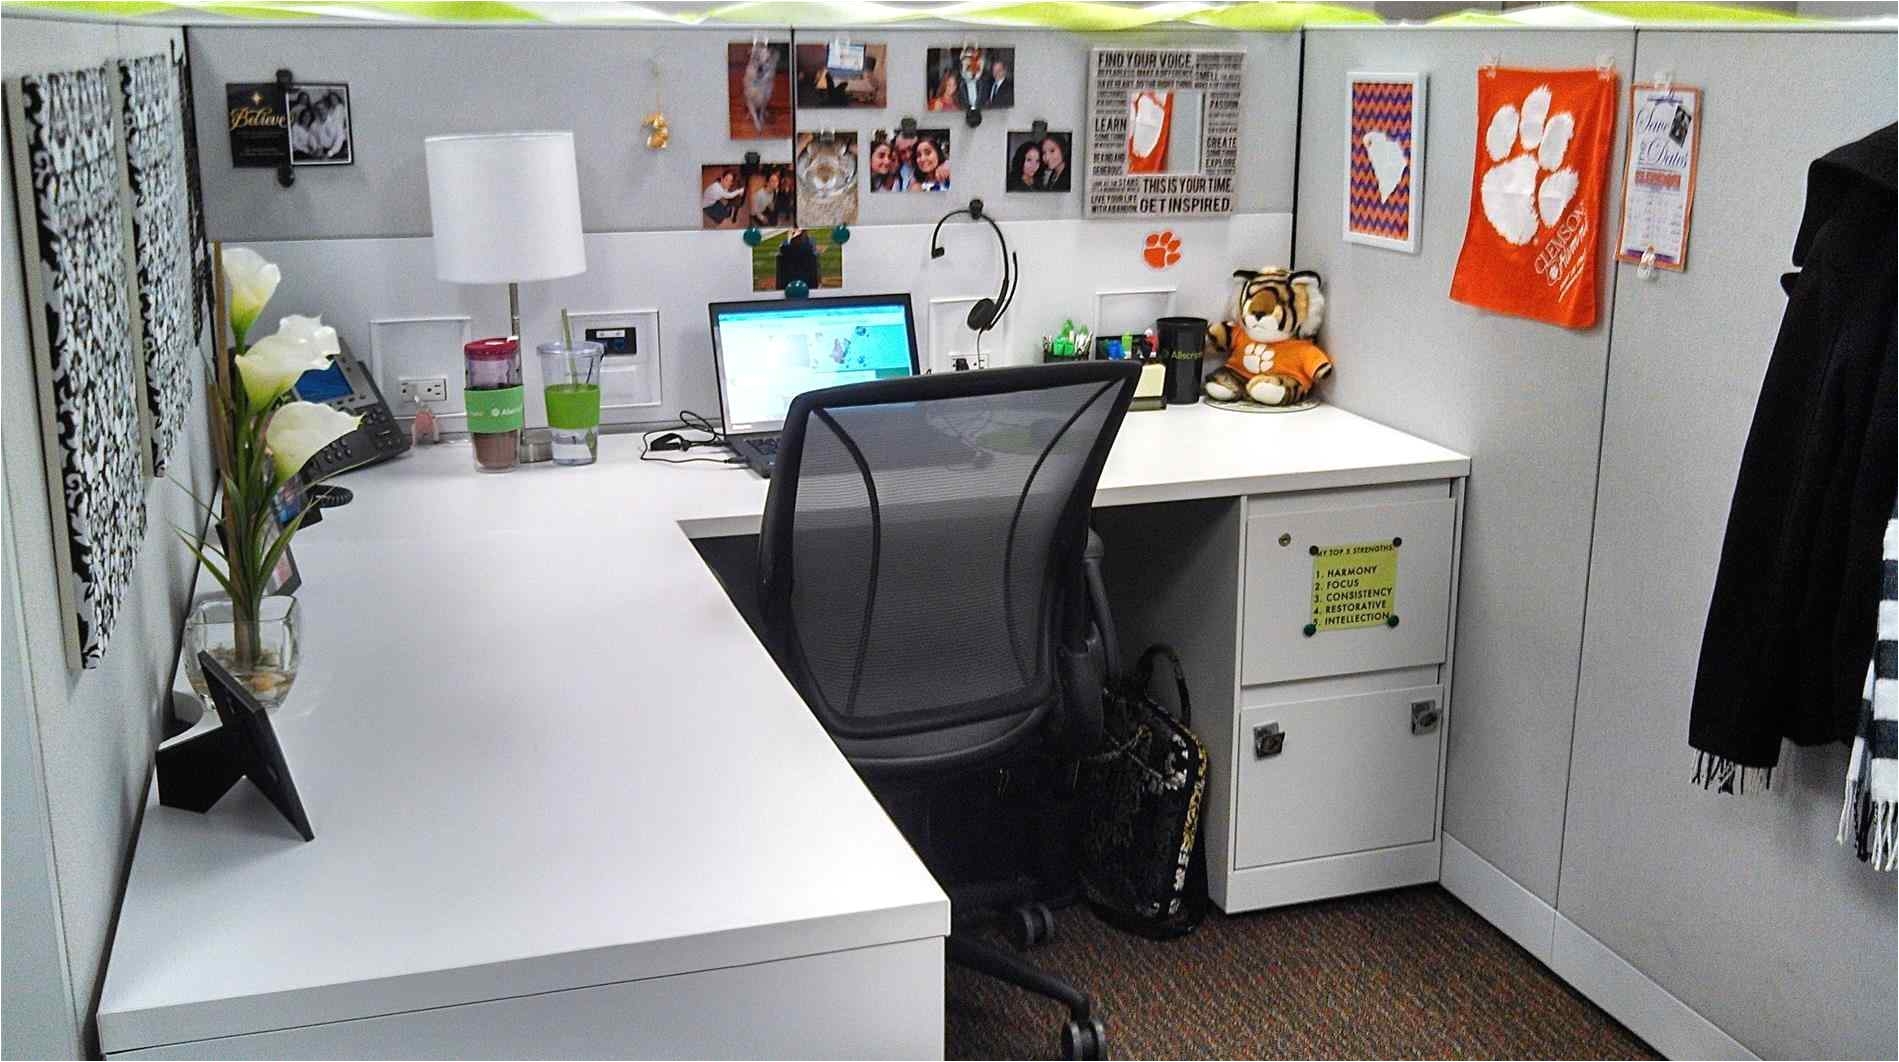 organization ideas tag super office rhsustainablepalsorg home diy decor how to gallery rhloversiqcom home small cubicle